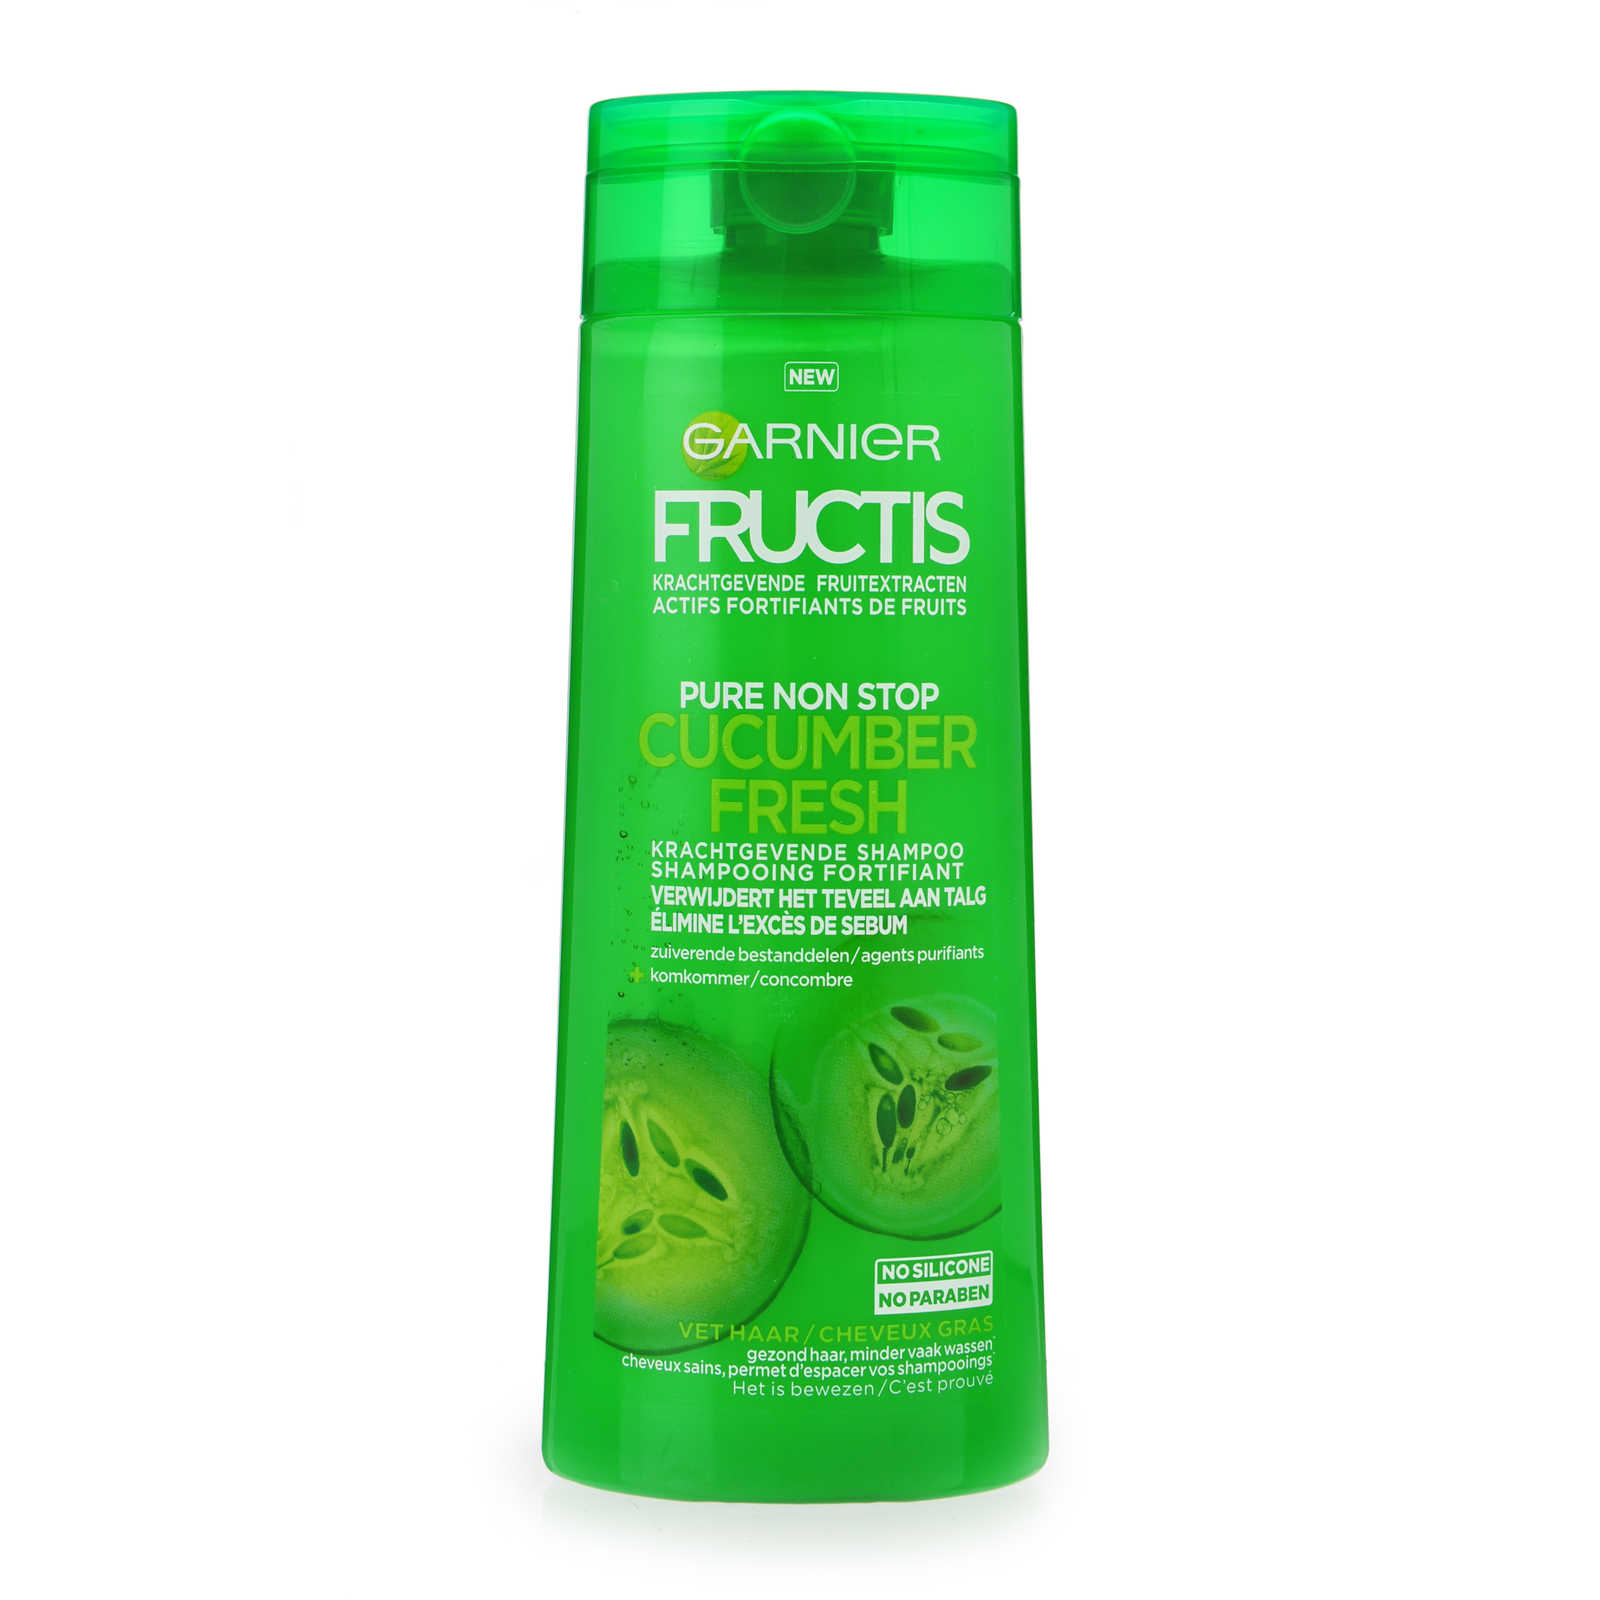 FRUCTIS SHAMPOING FORTIFIANT concombre cheveux gras